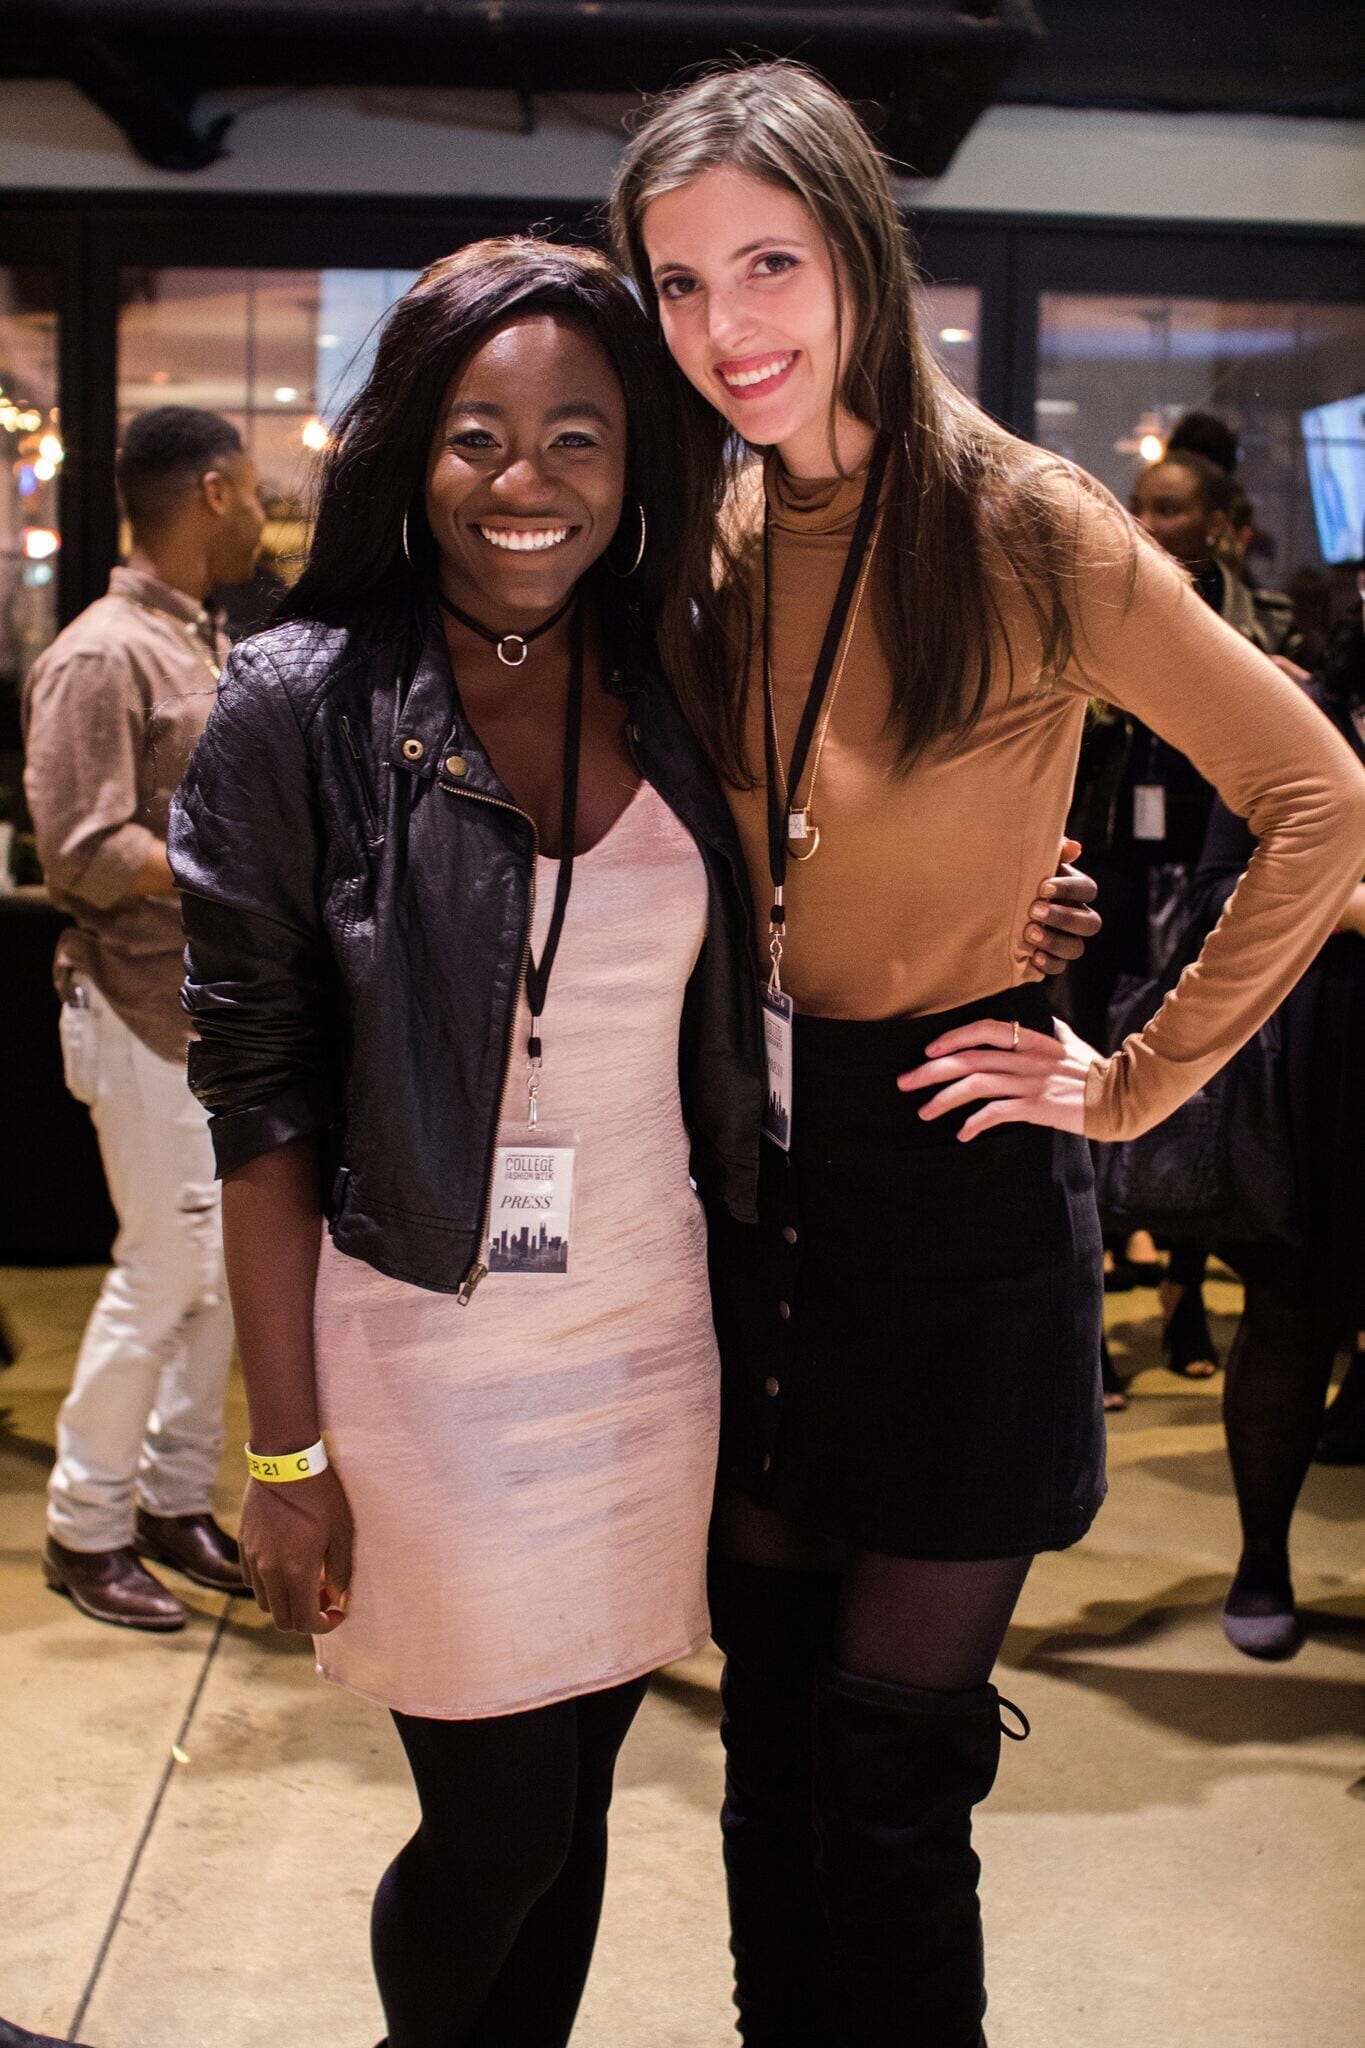 Bloggers + Fashion + Networking // Chicago College Fashion Week with Her Campus